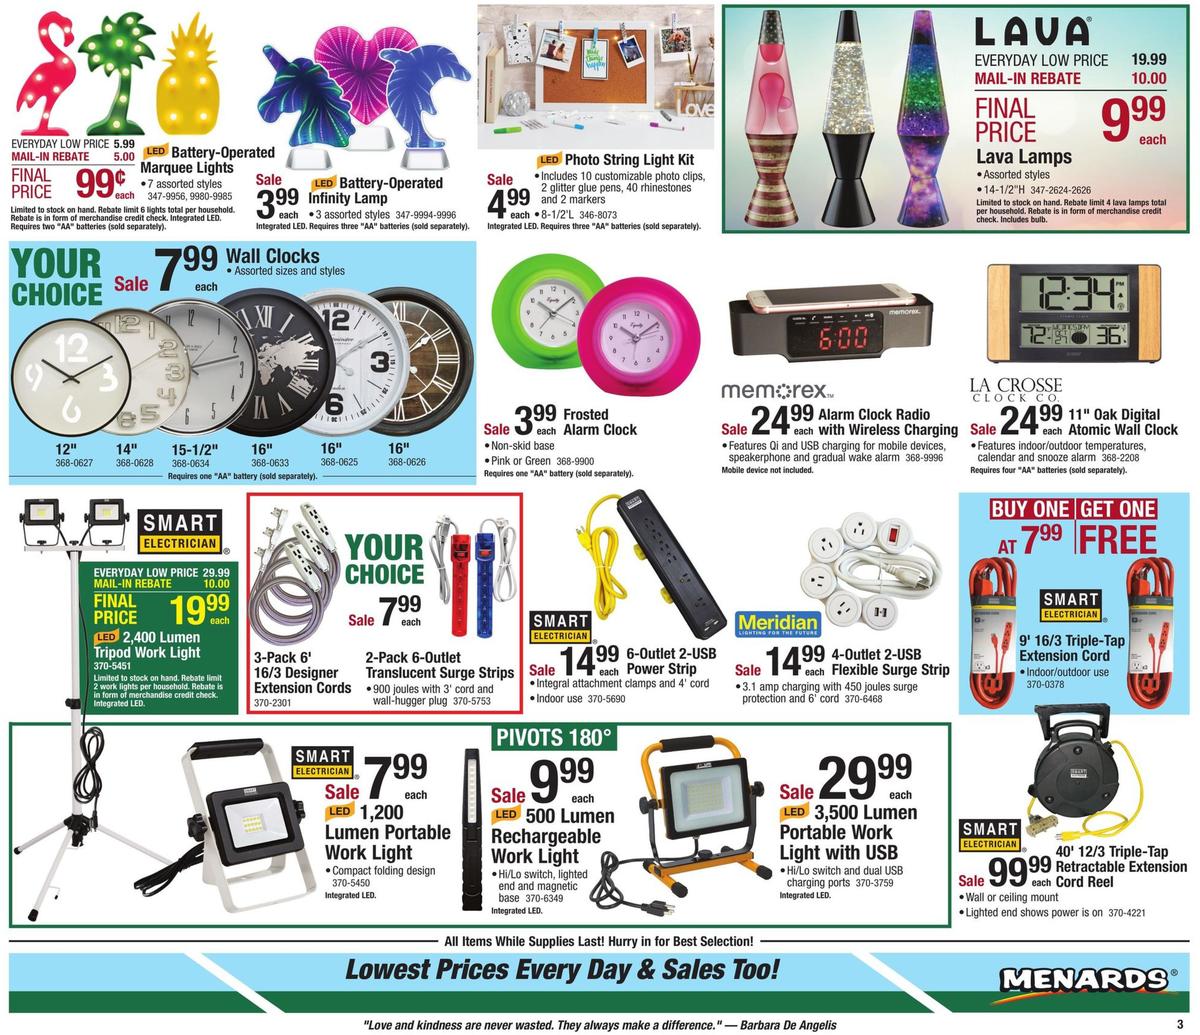 Menards Home For Christmas Sale Weekly Ad from December 15